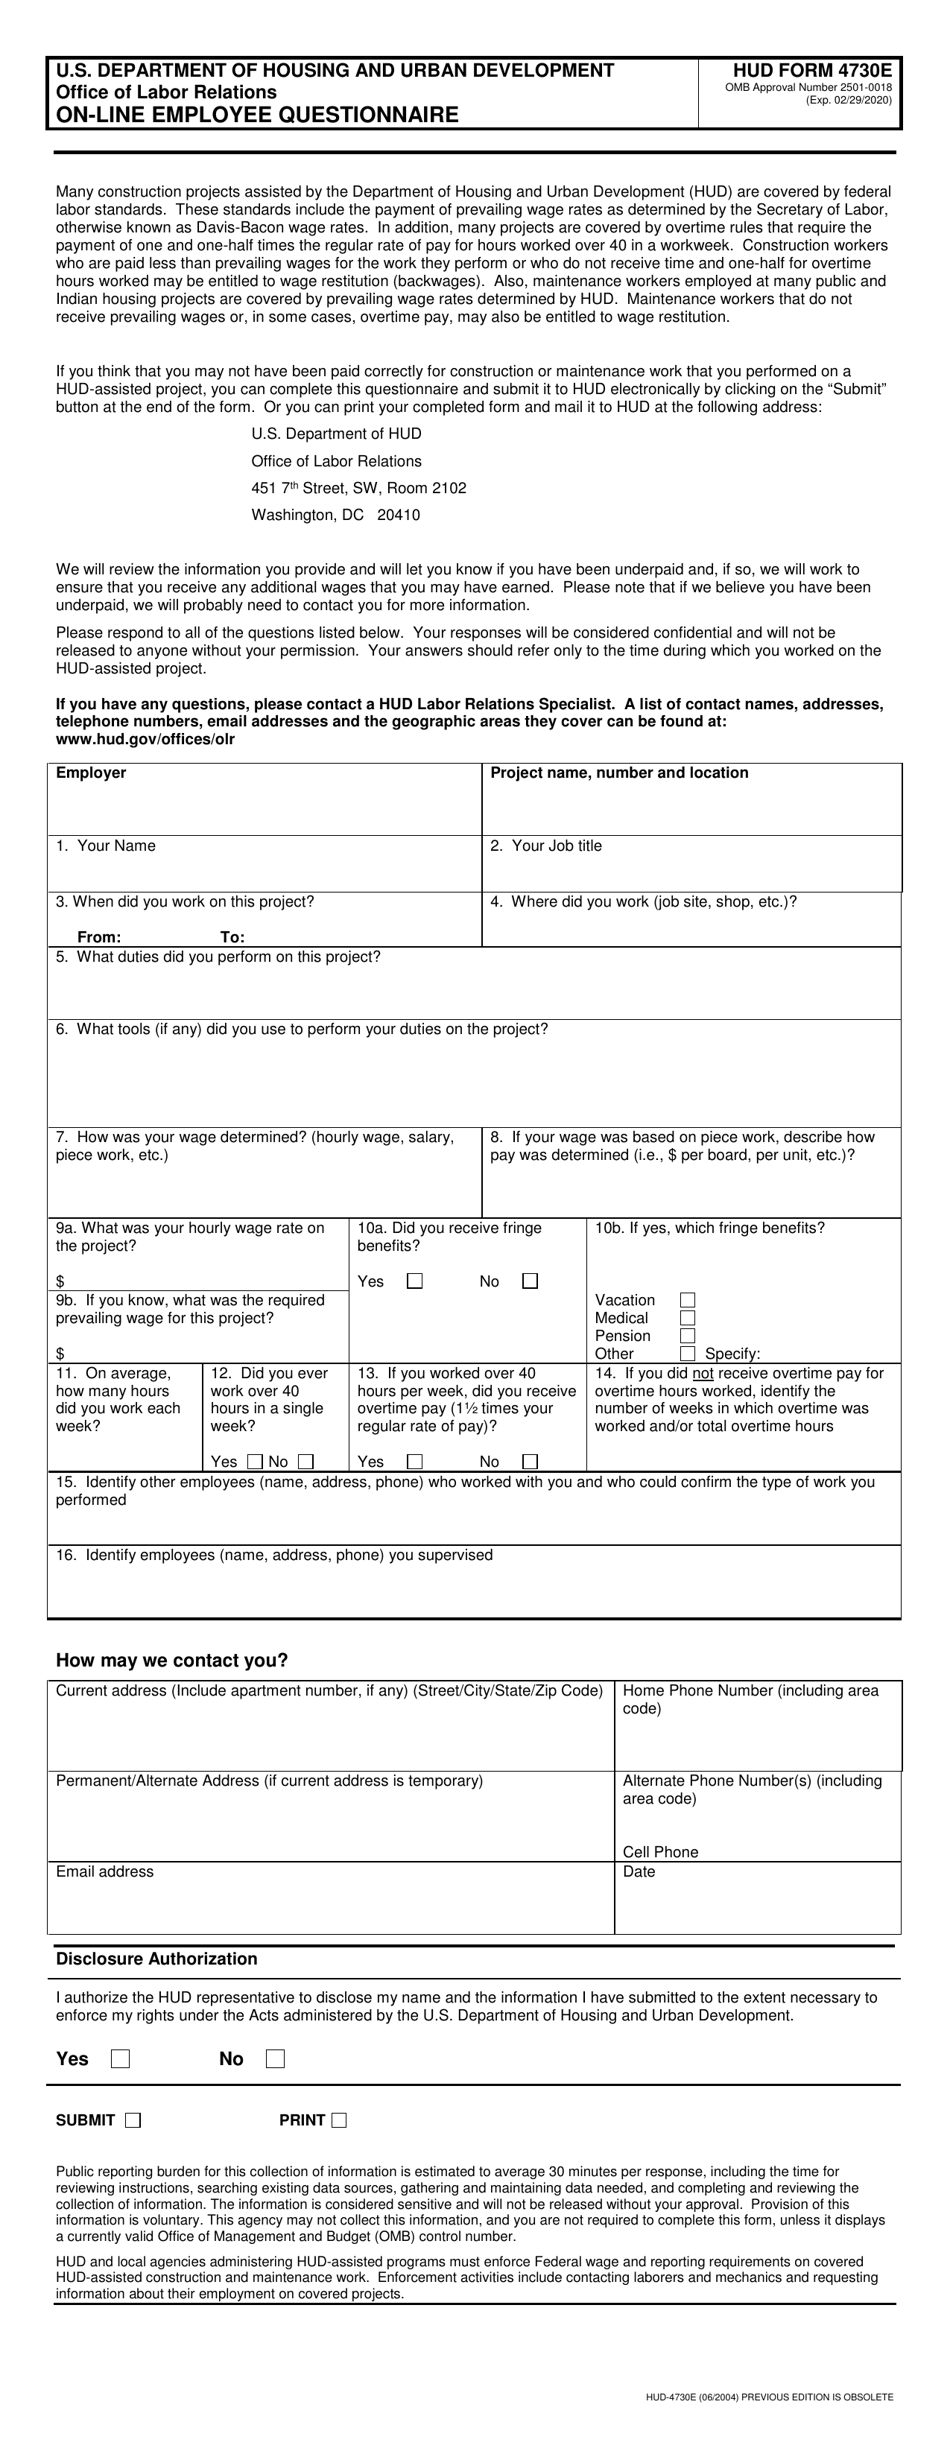 Form HUD-4730E On-Line Employee Questionnaire, Page 1